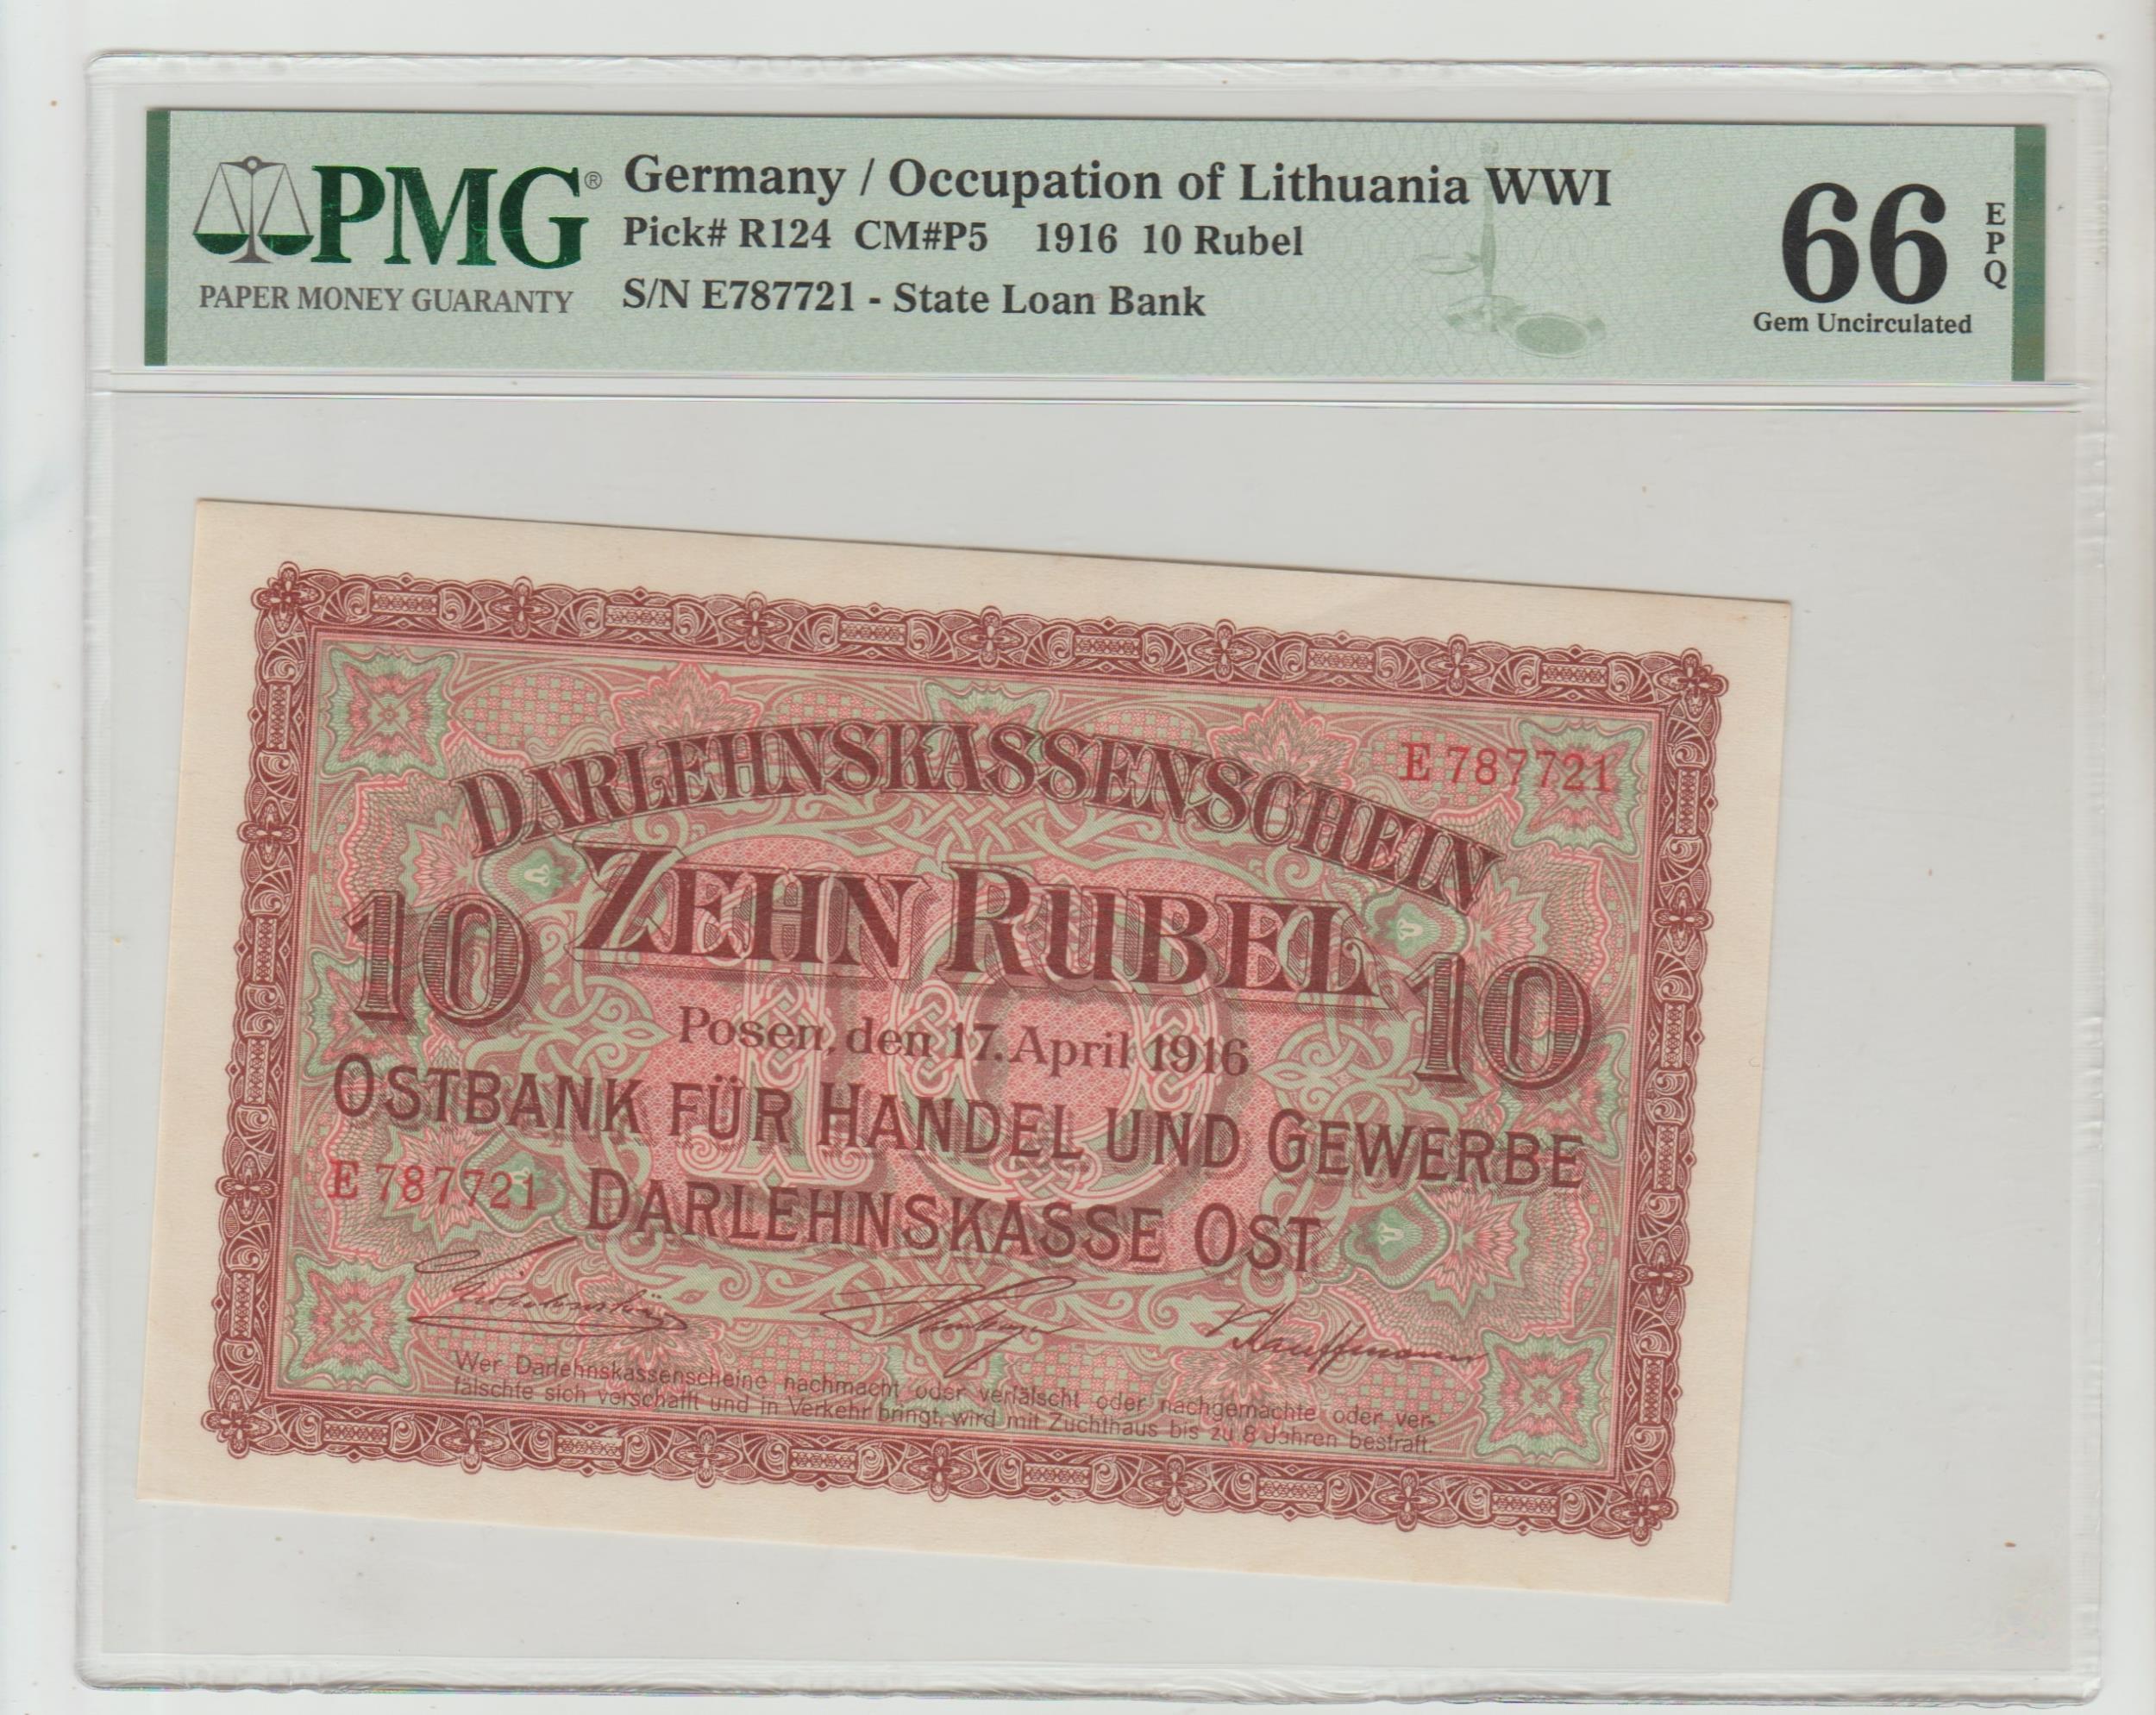 Germany / Occupation of Lithuania, 10 Rubel, 1916 year